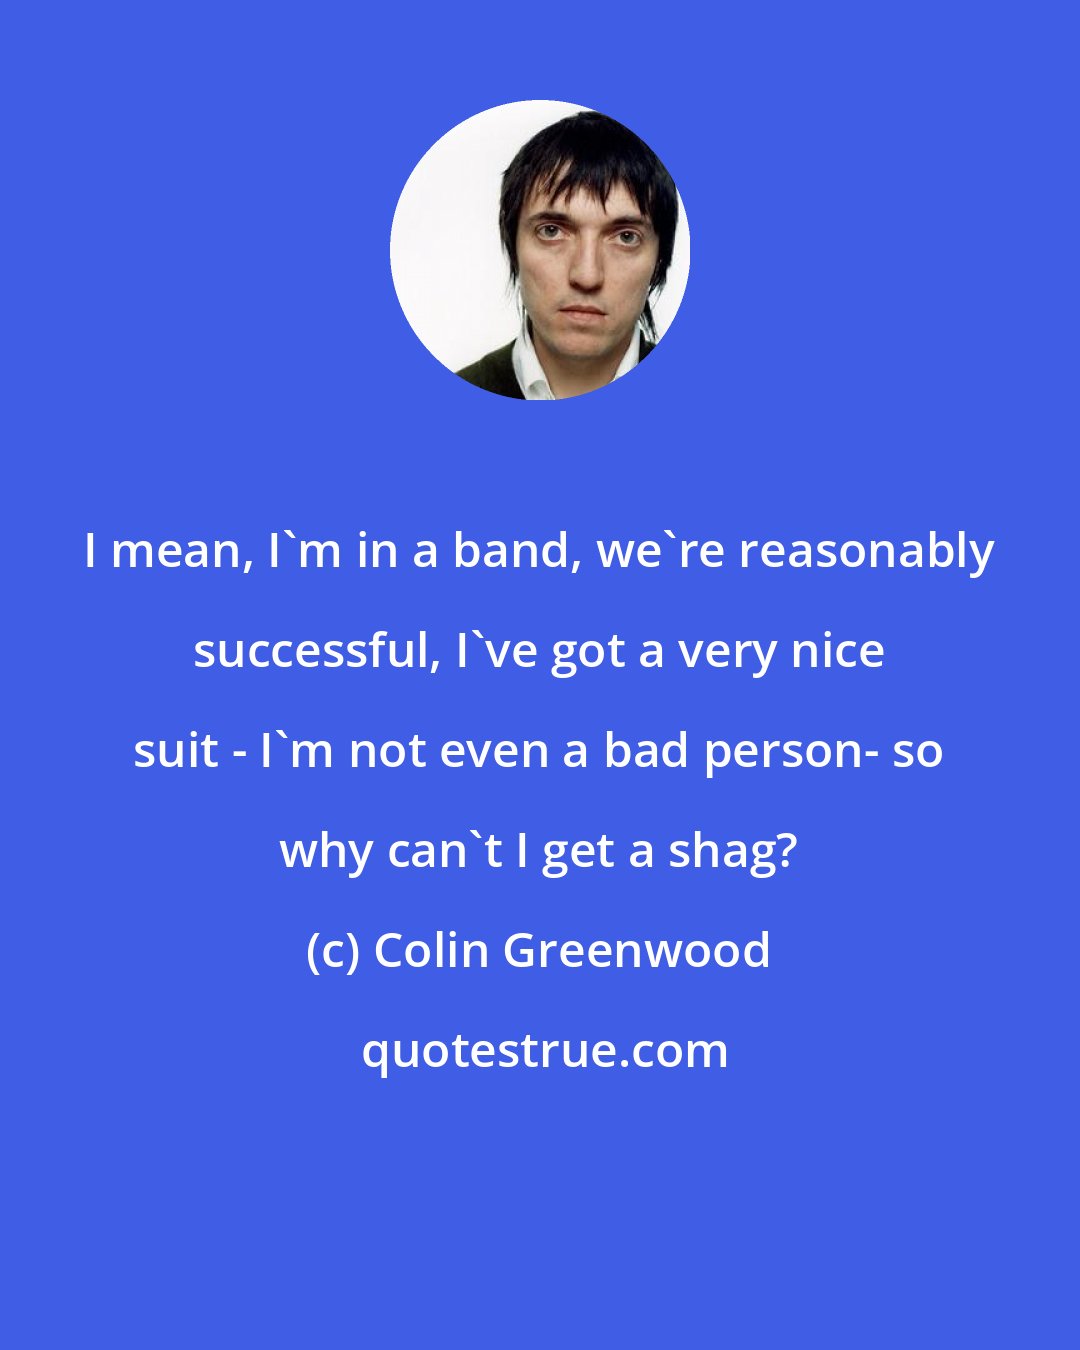 Colin Greenwood: I mean, I'm in a band, we're reasonably successful, I've got a very nice suit - I'm not even a bad person- so why can't I get a shag?